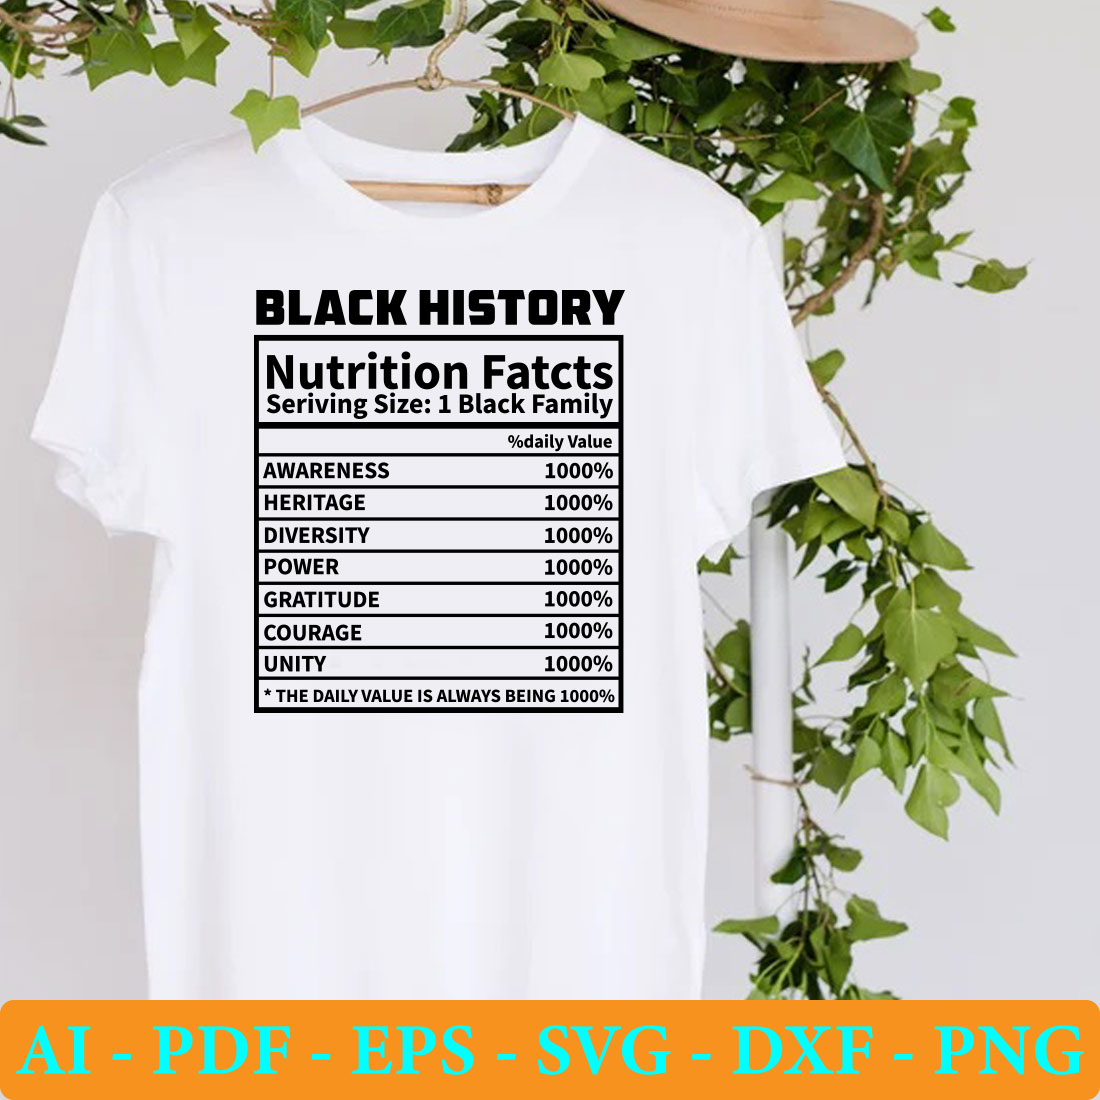 Black history nutrition fact t - shirt on a hanger.